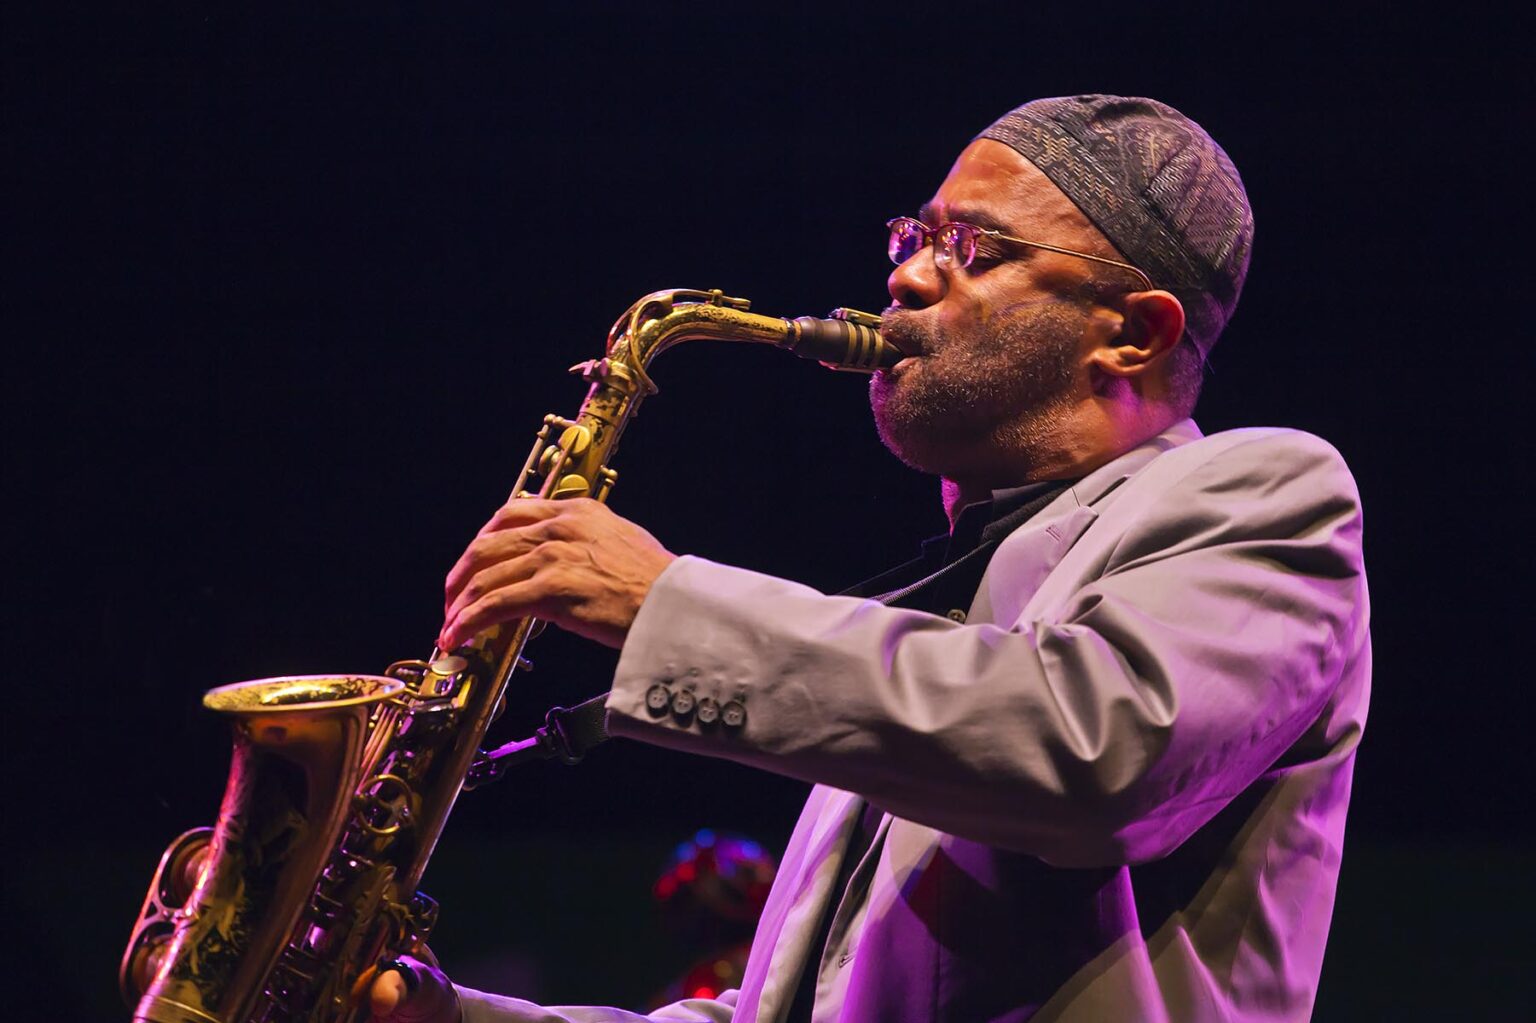 KENNY GARRETT on Saxophone with CHICK COREA on the Jimmy Lyons Stage - 2010 MONTEREY JAZZ FESTIVAL, CALIFORNIA